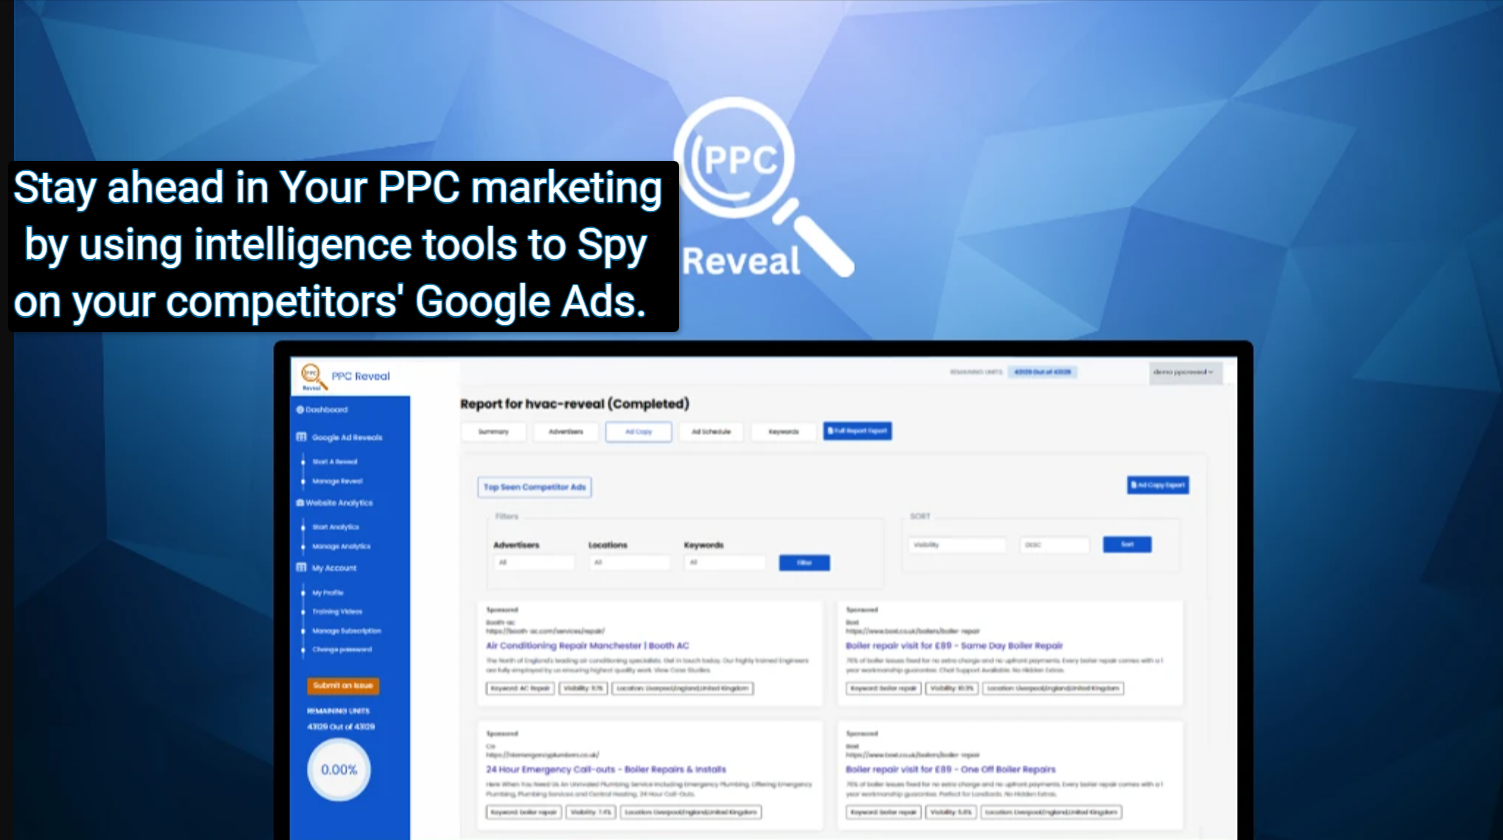 as web PPCReveal 16 9 1 png 1024576 PPC Reveal Review - Stay ahead in Your PPC marketing by using intelligence tools to Spy on your competitors' Google Ads.